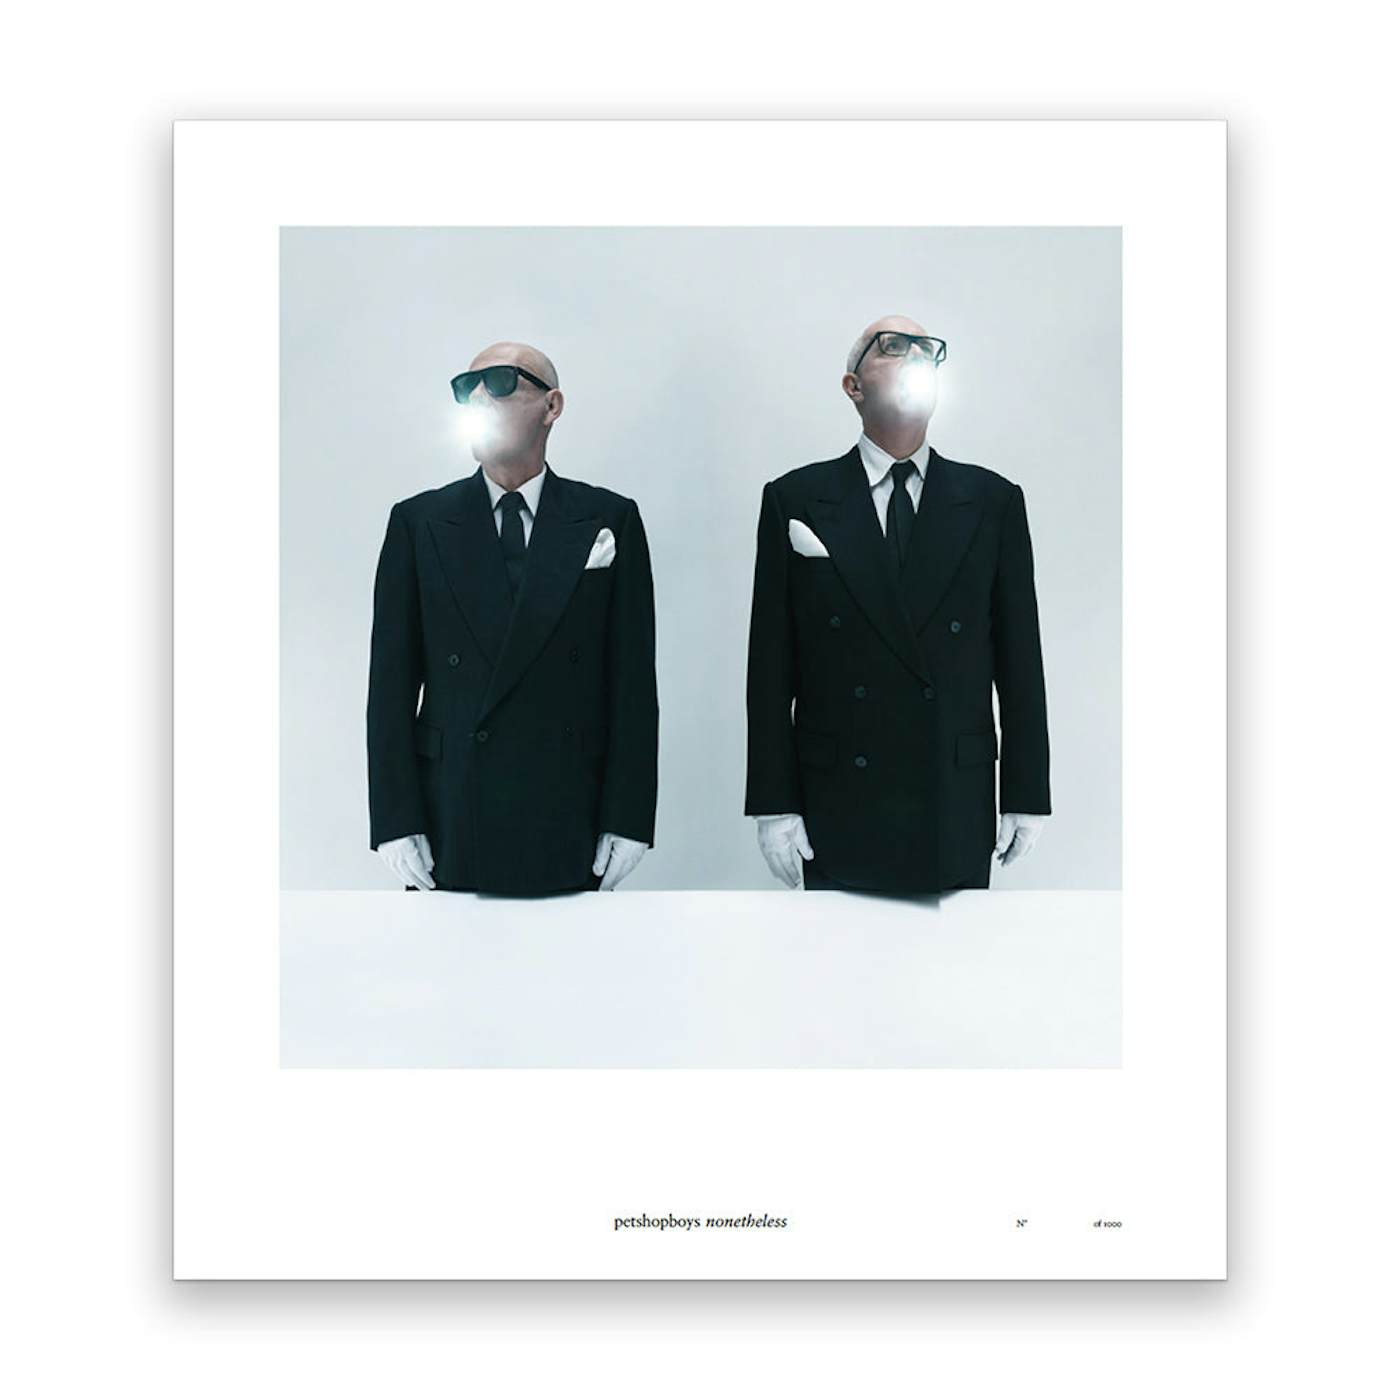 Pet Shop Boys Nonetheless Limited Edition Print [Numbered]